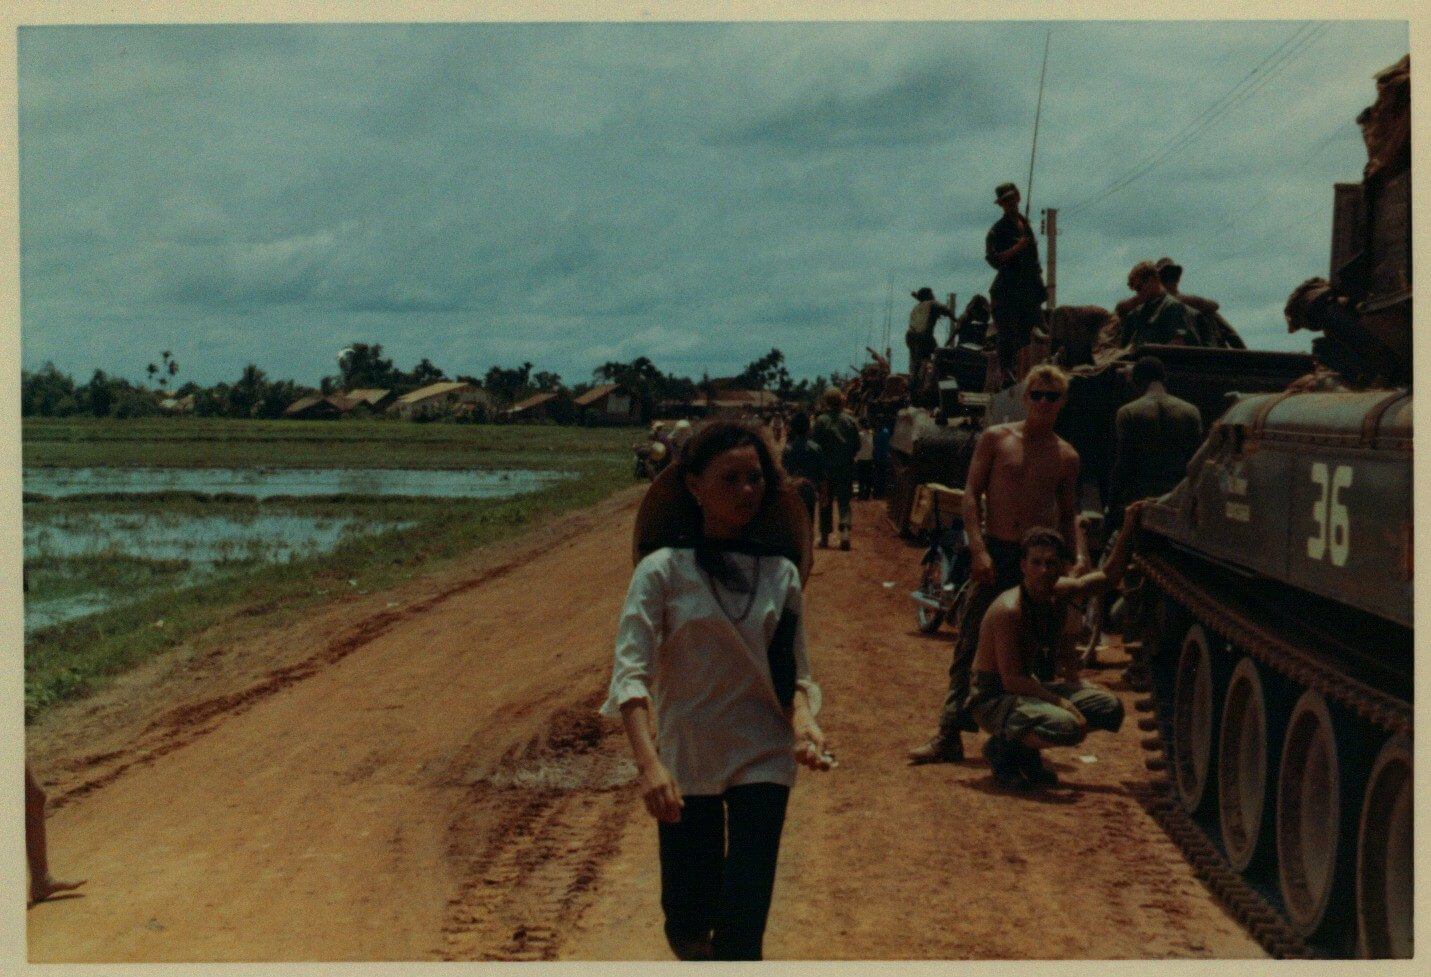 U.S. soldiers stand and lean on tanks watching a young Vietnamese woman walk by.